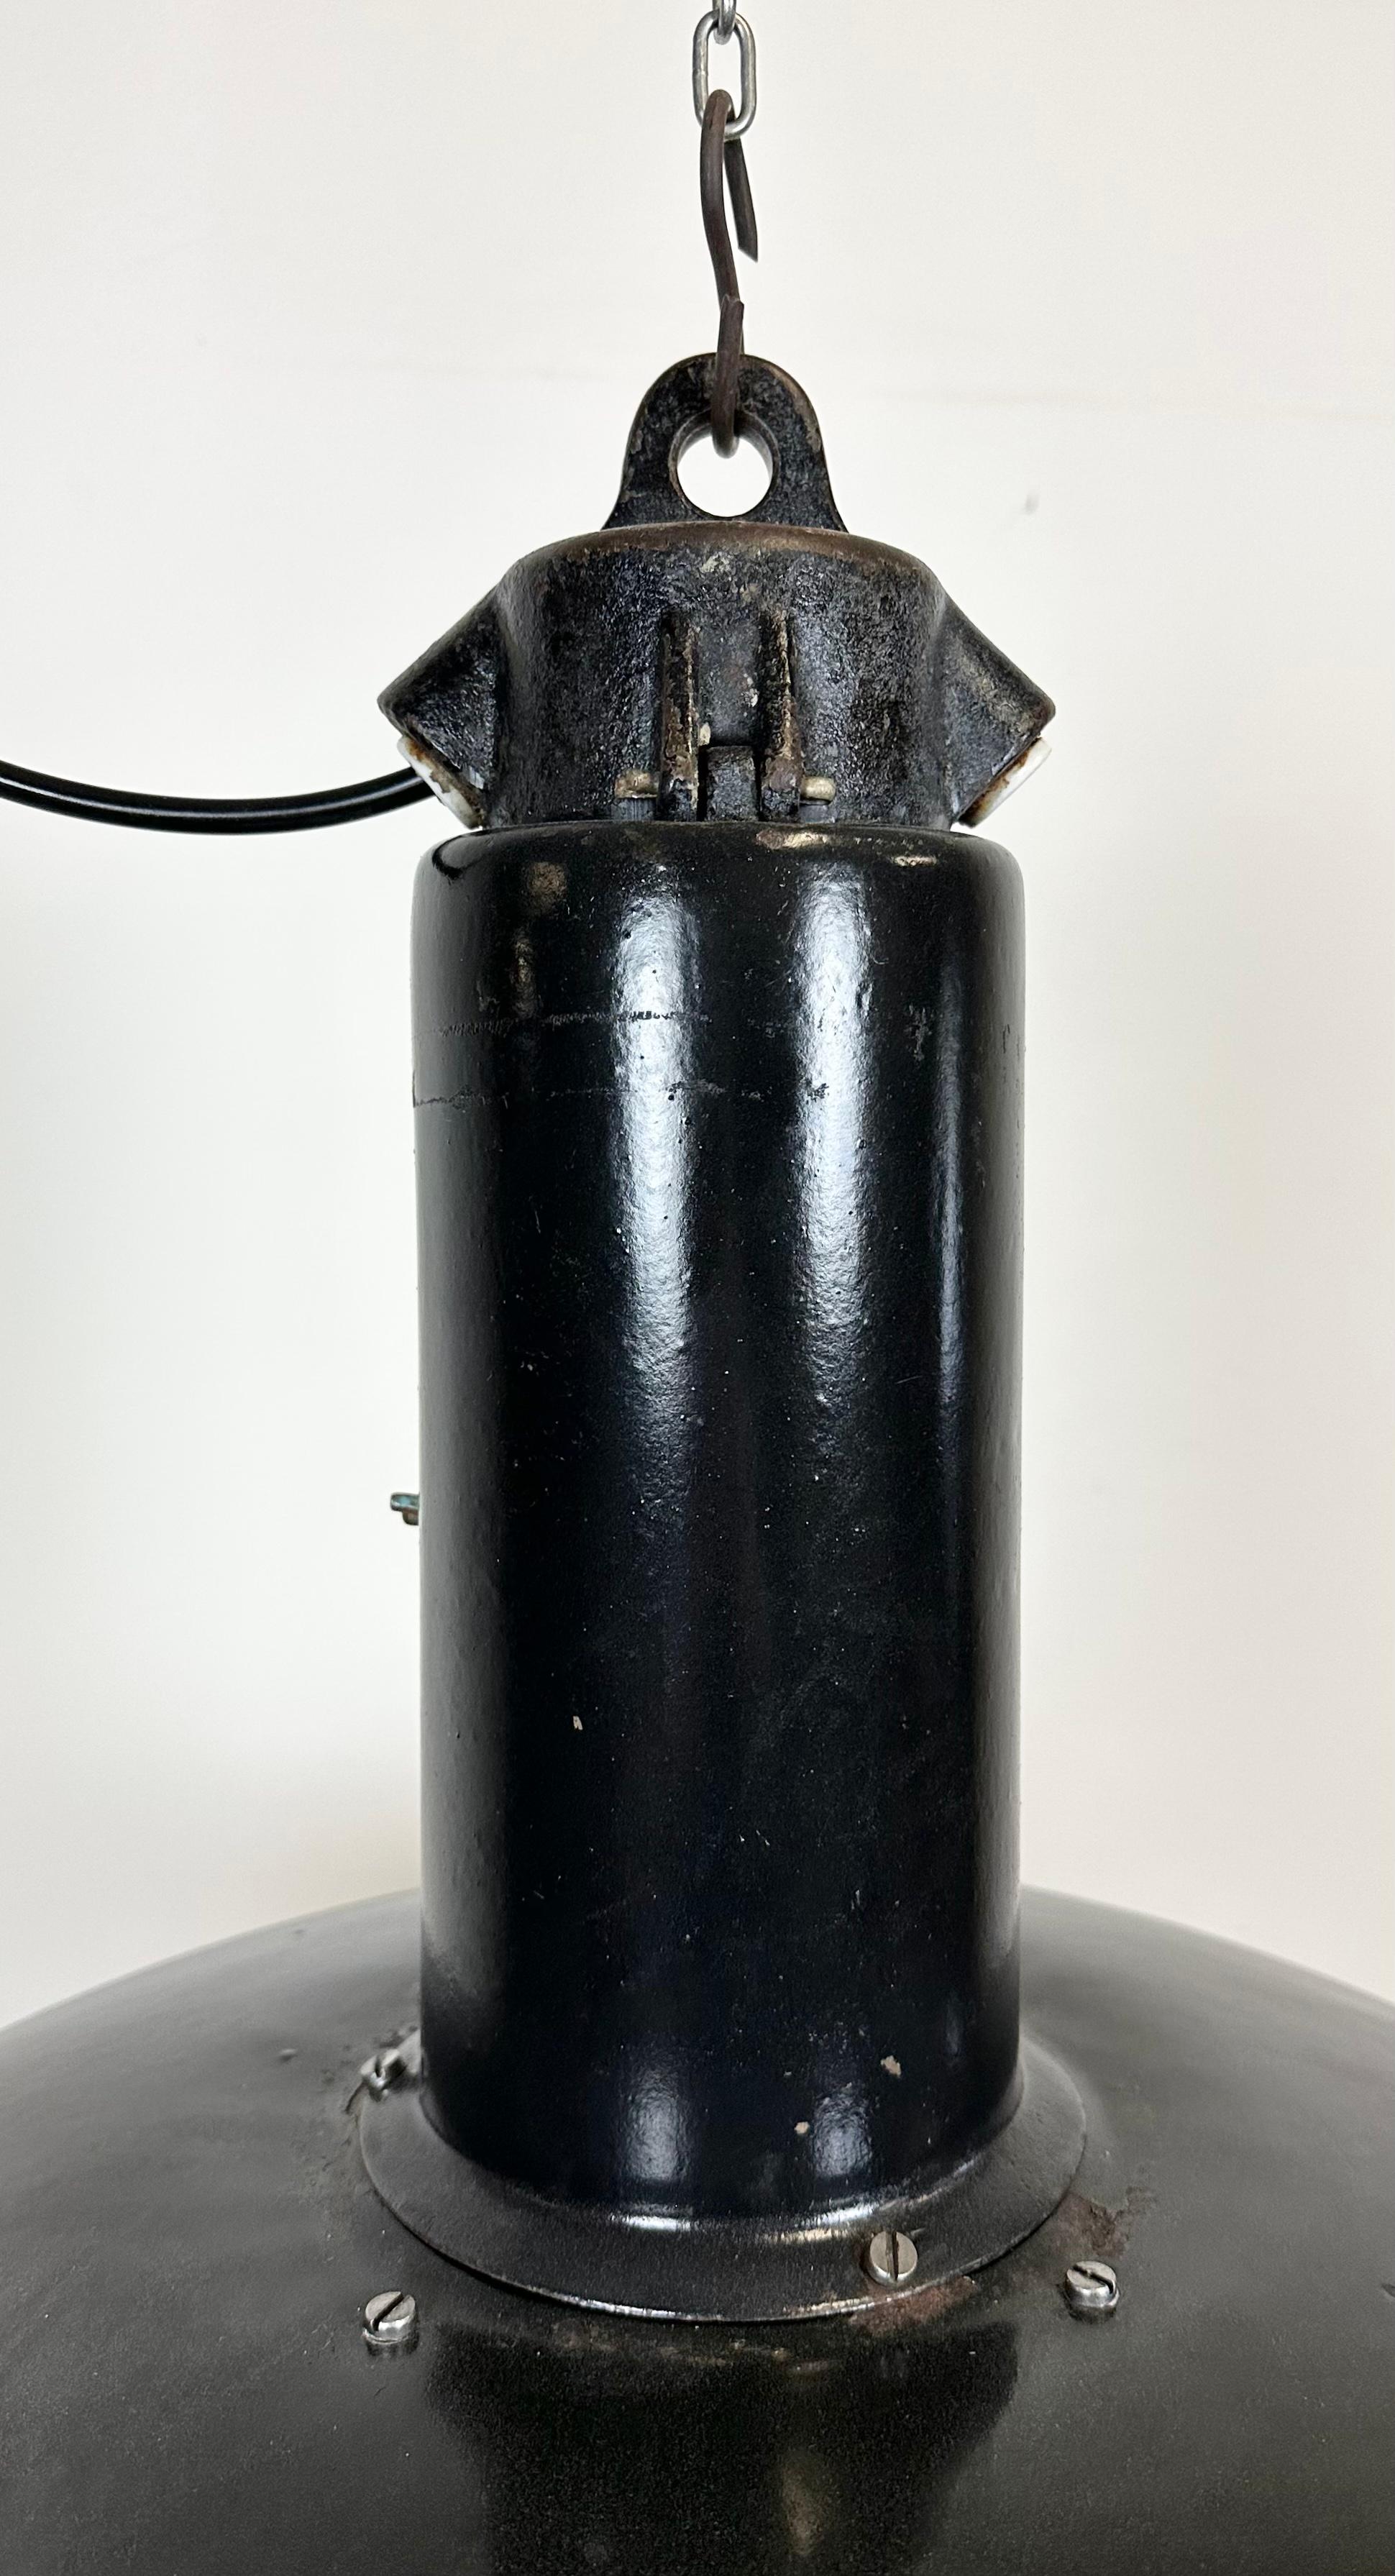 Czech Industrial Black Enamel Factory Pendant Lamp with Iron Top, 1950s For Sale